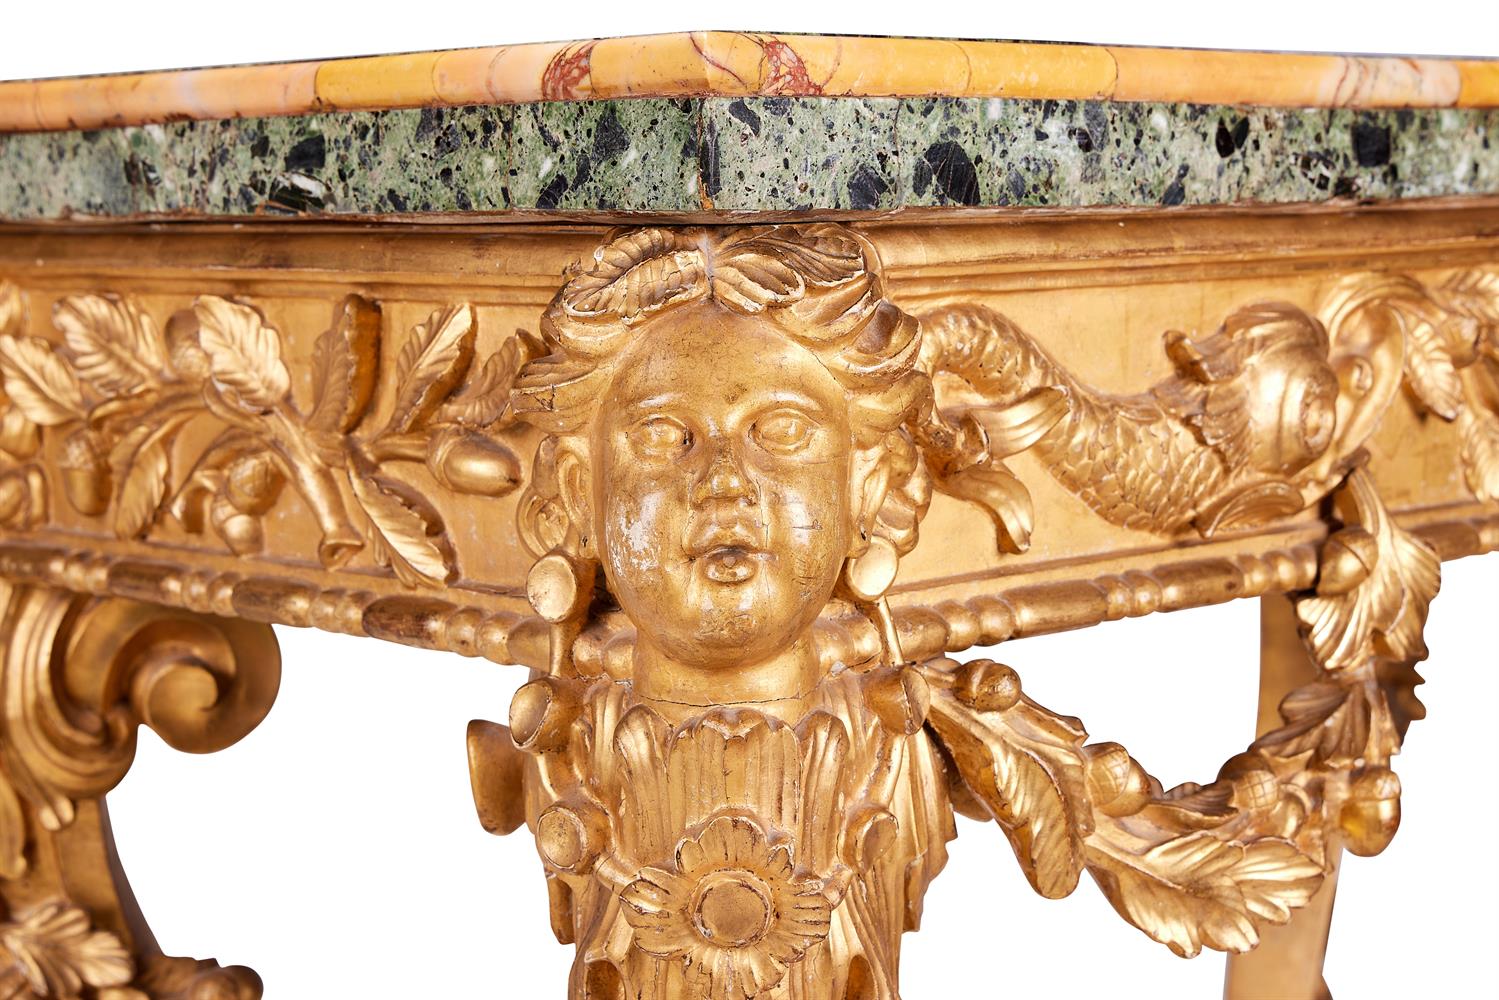 AN ITALIAN GILTWOOD TABLE, ROME, MID 18TH CENTURY - Image 3 of 4